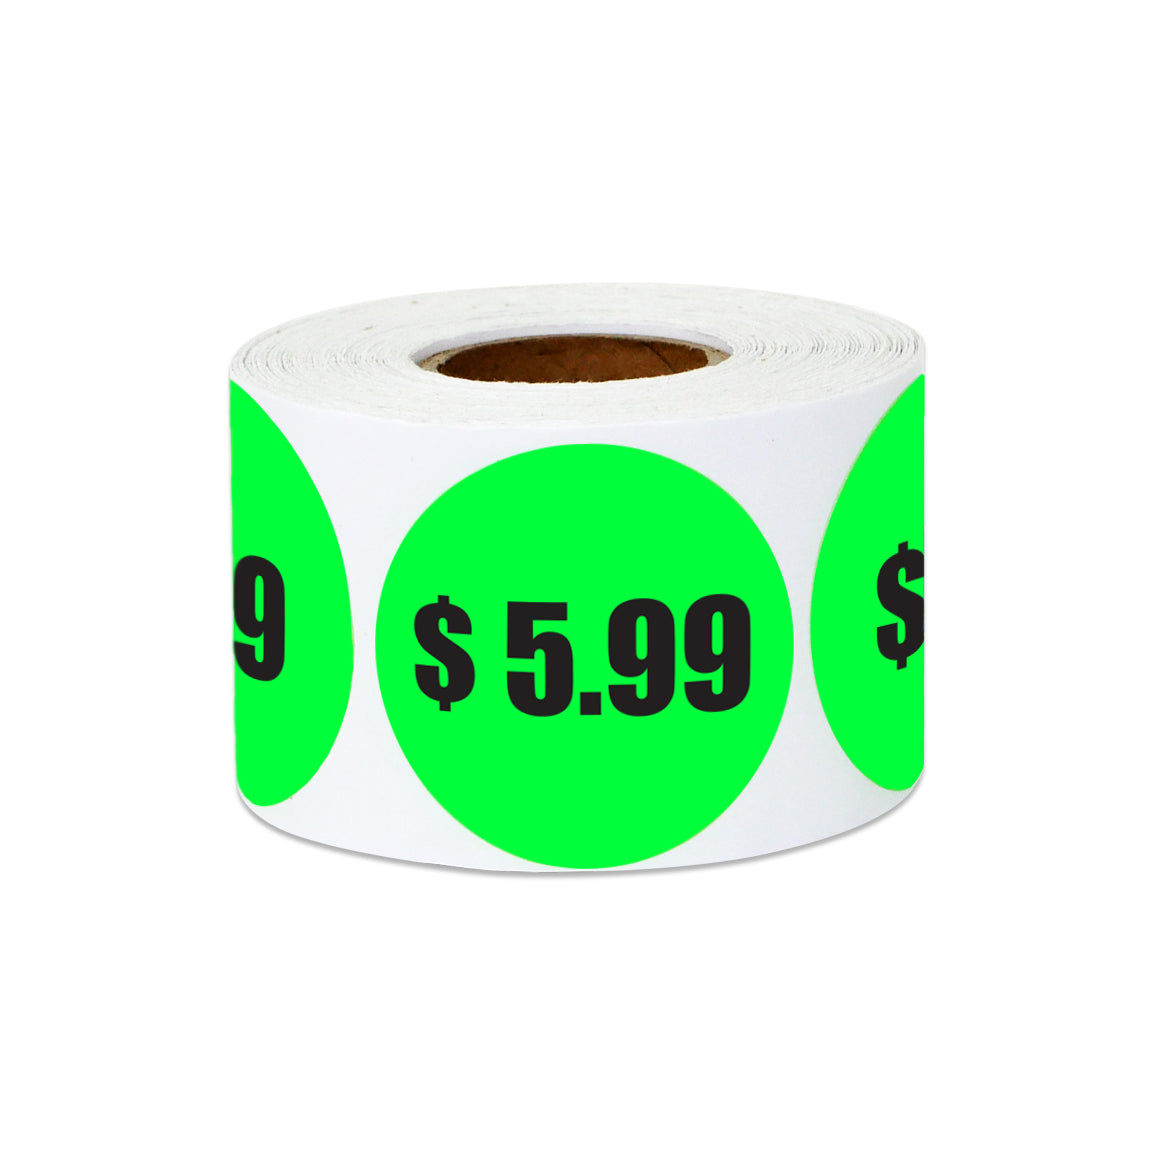 1.5 inch  Retail & Sale: $5.99 Five Dollars and 99 Cents Pricing